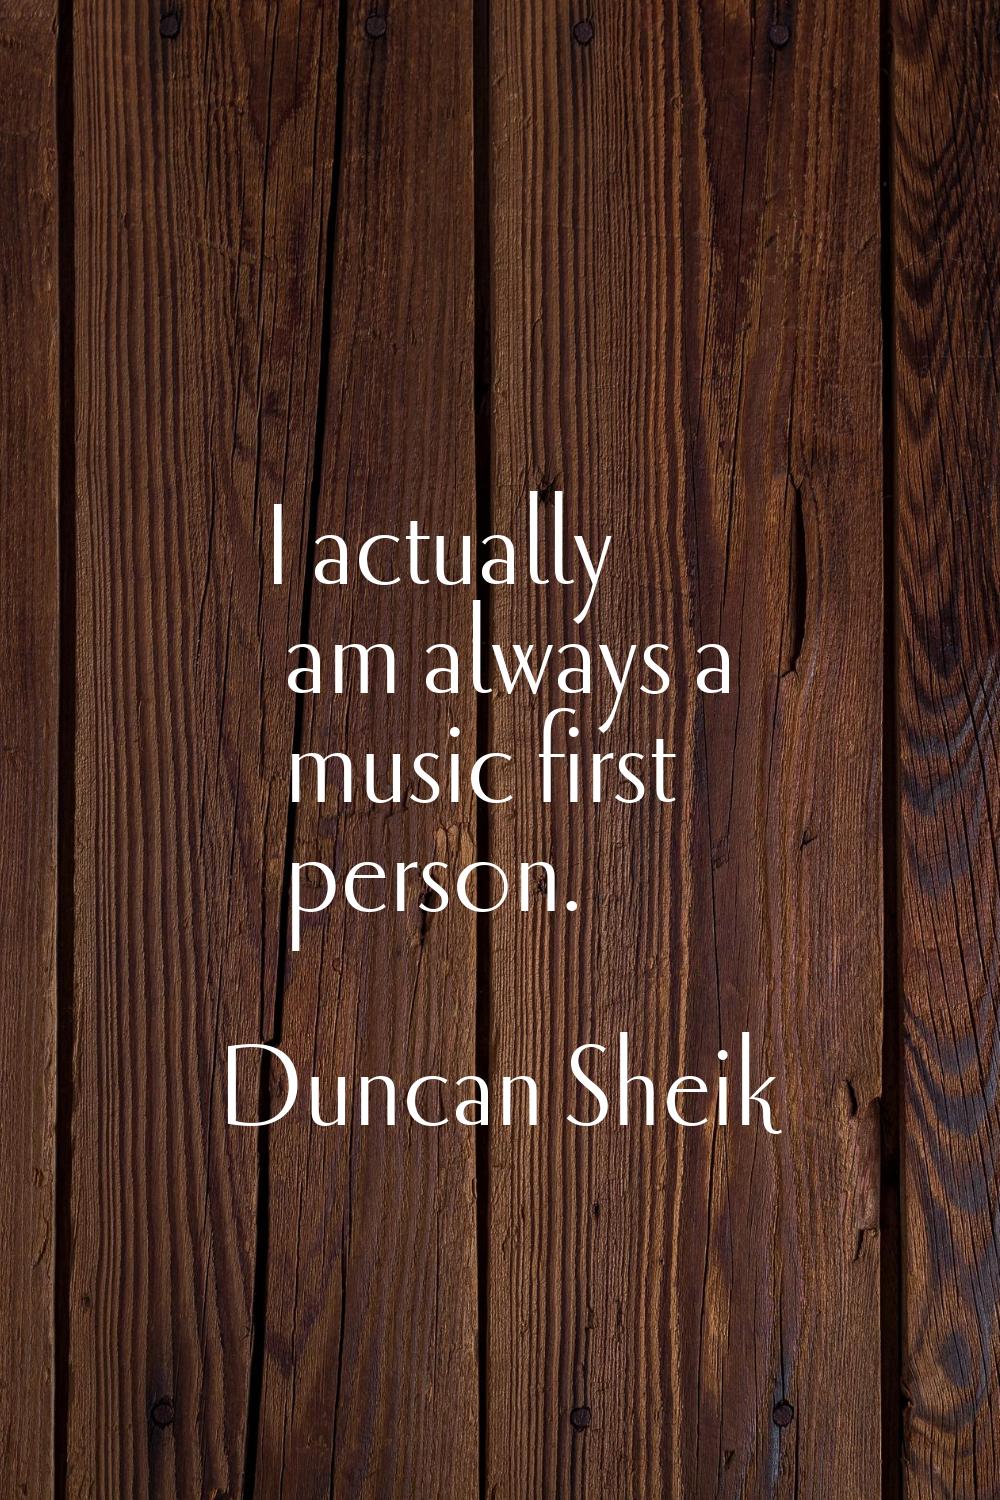 I actually am always a music first person.